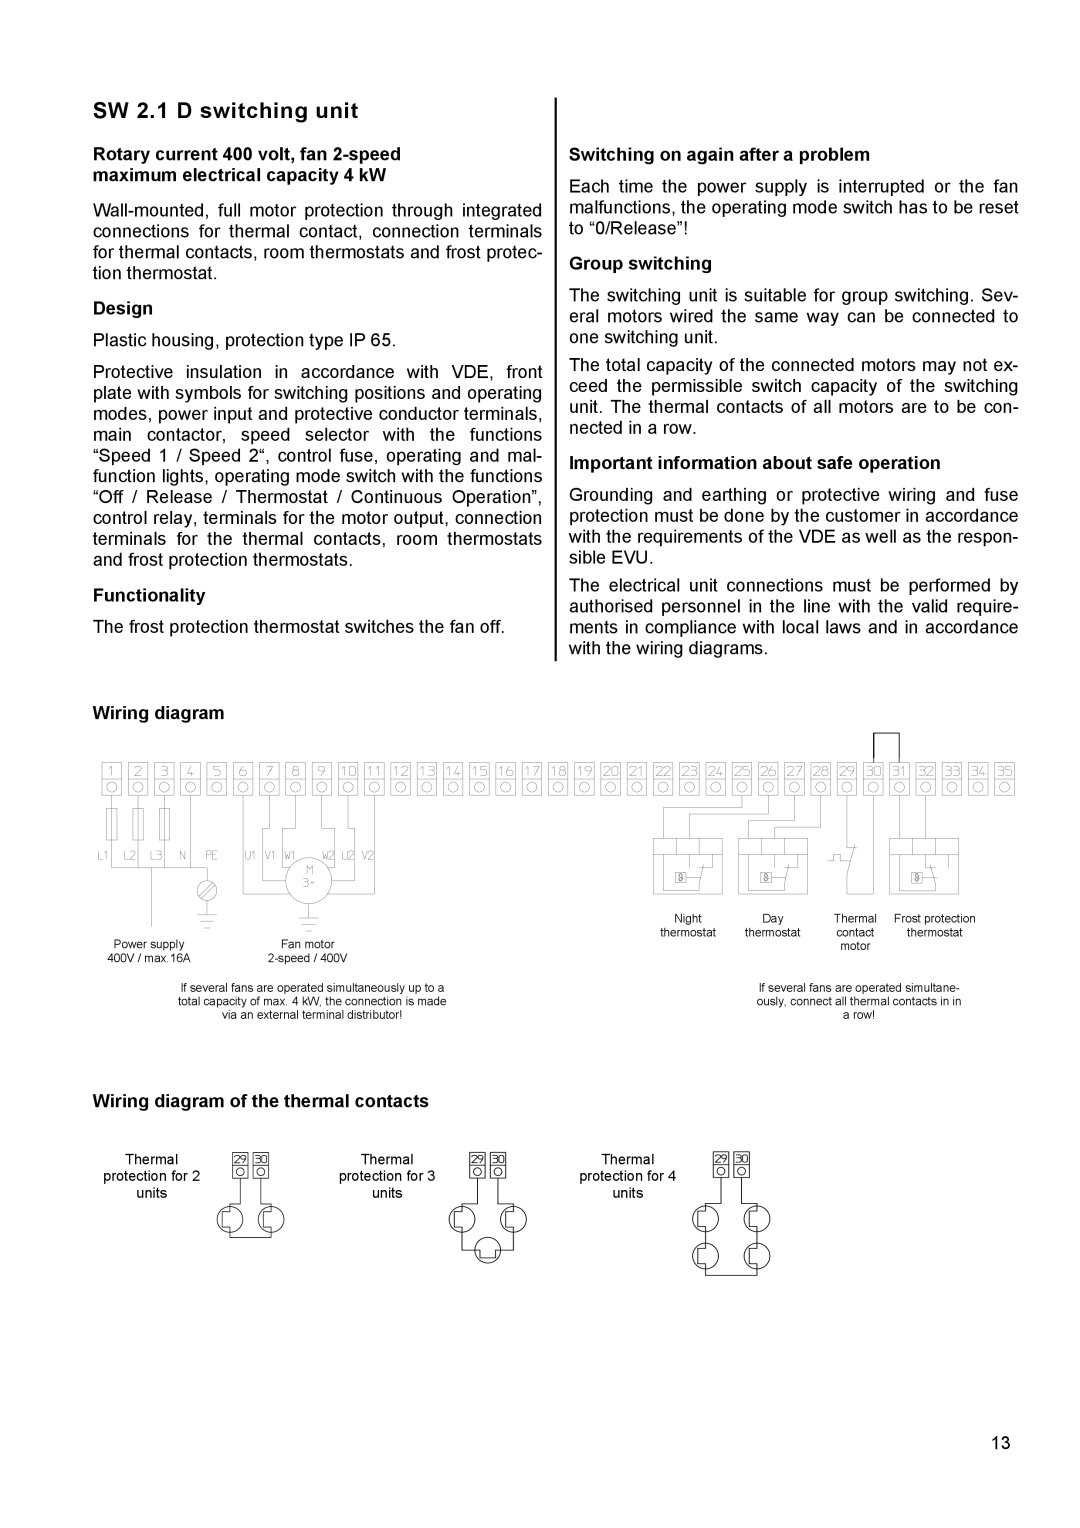 Panasonic PWW 4000 manual SW 2.1 D switching unit, Functionality, Wiring diagram of the thermal contacts, Design 